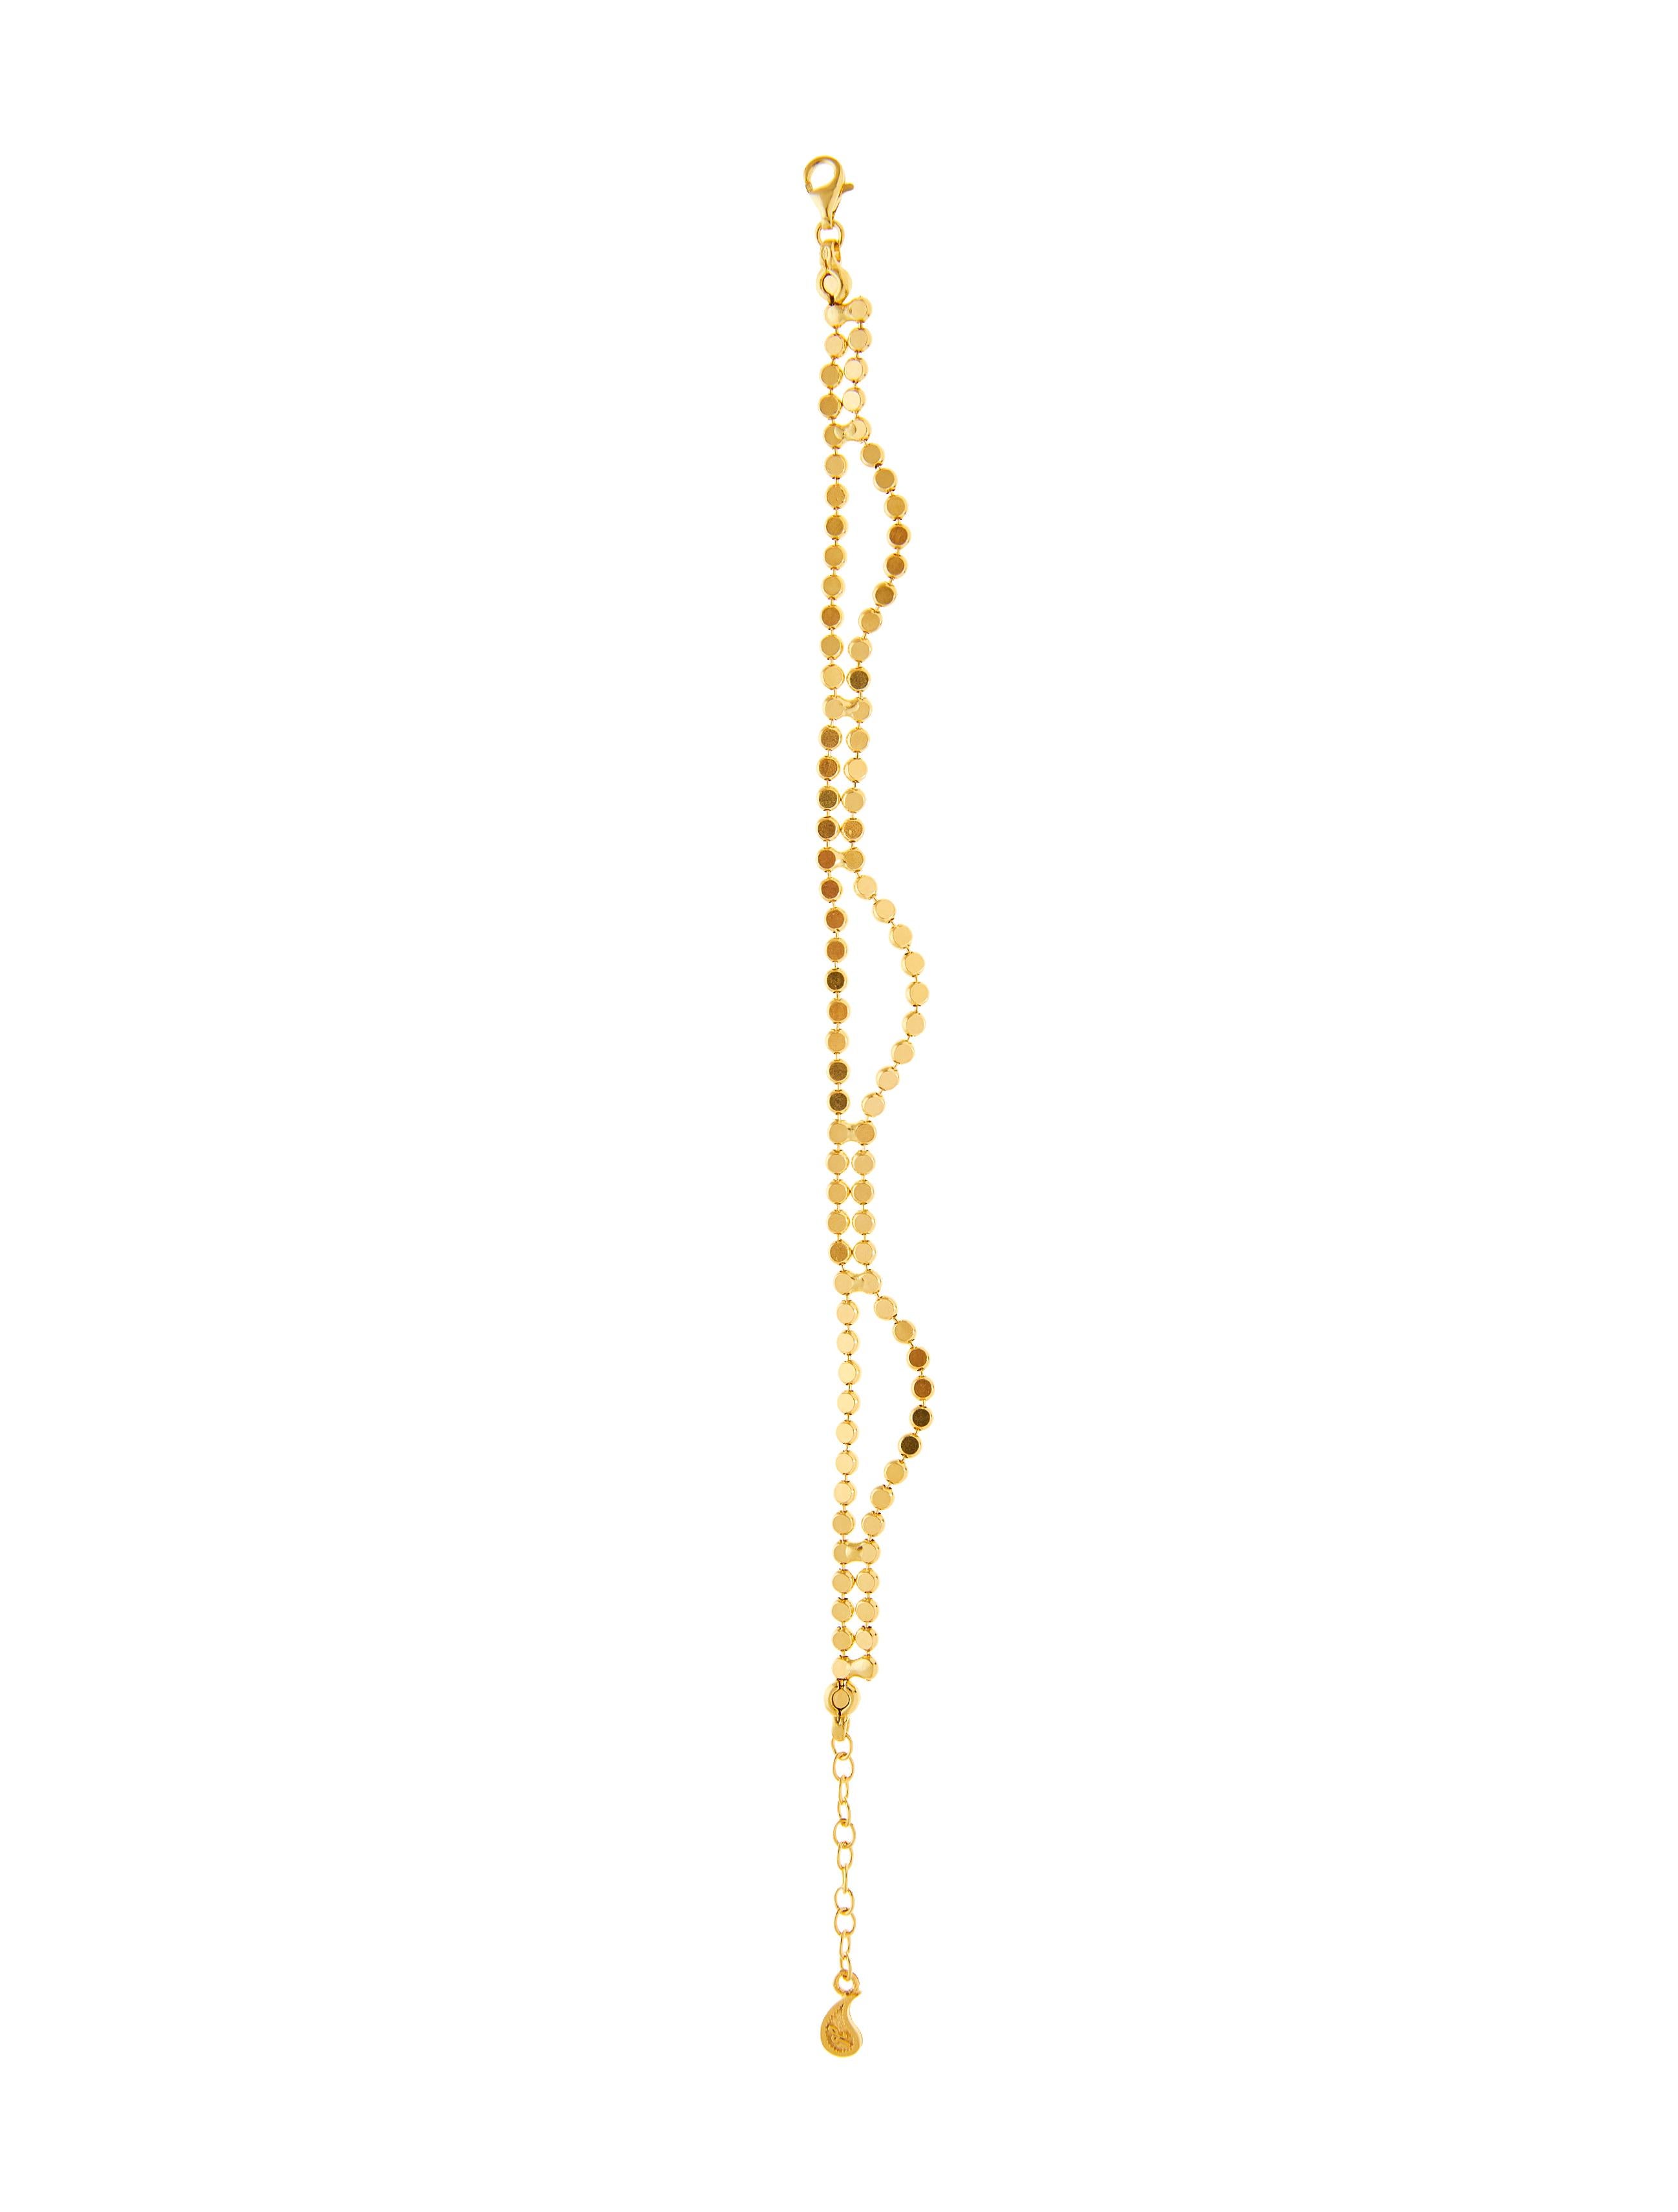 Mineral Necklace 

Chain Bracelet  that consists of wave shaped curves. This chain has the nature to reflect light and bring glow to the wearer. It makes a great everyday piece but also can be worn in a formal environment. 
 
Hand-crafted by local